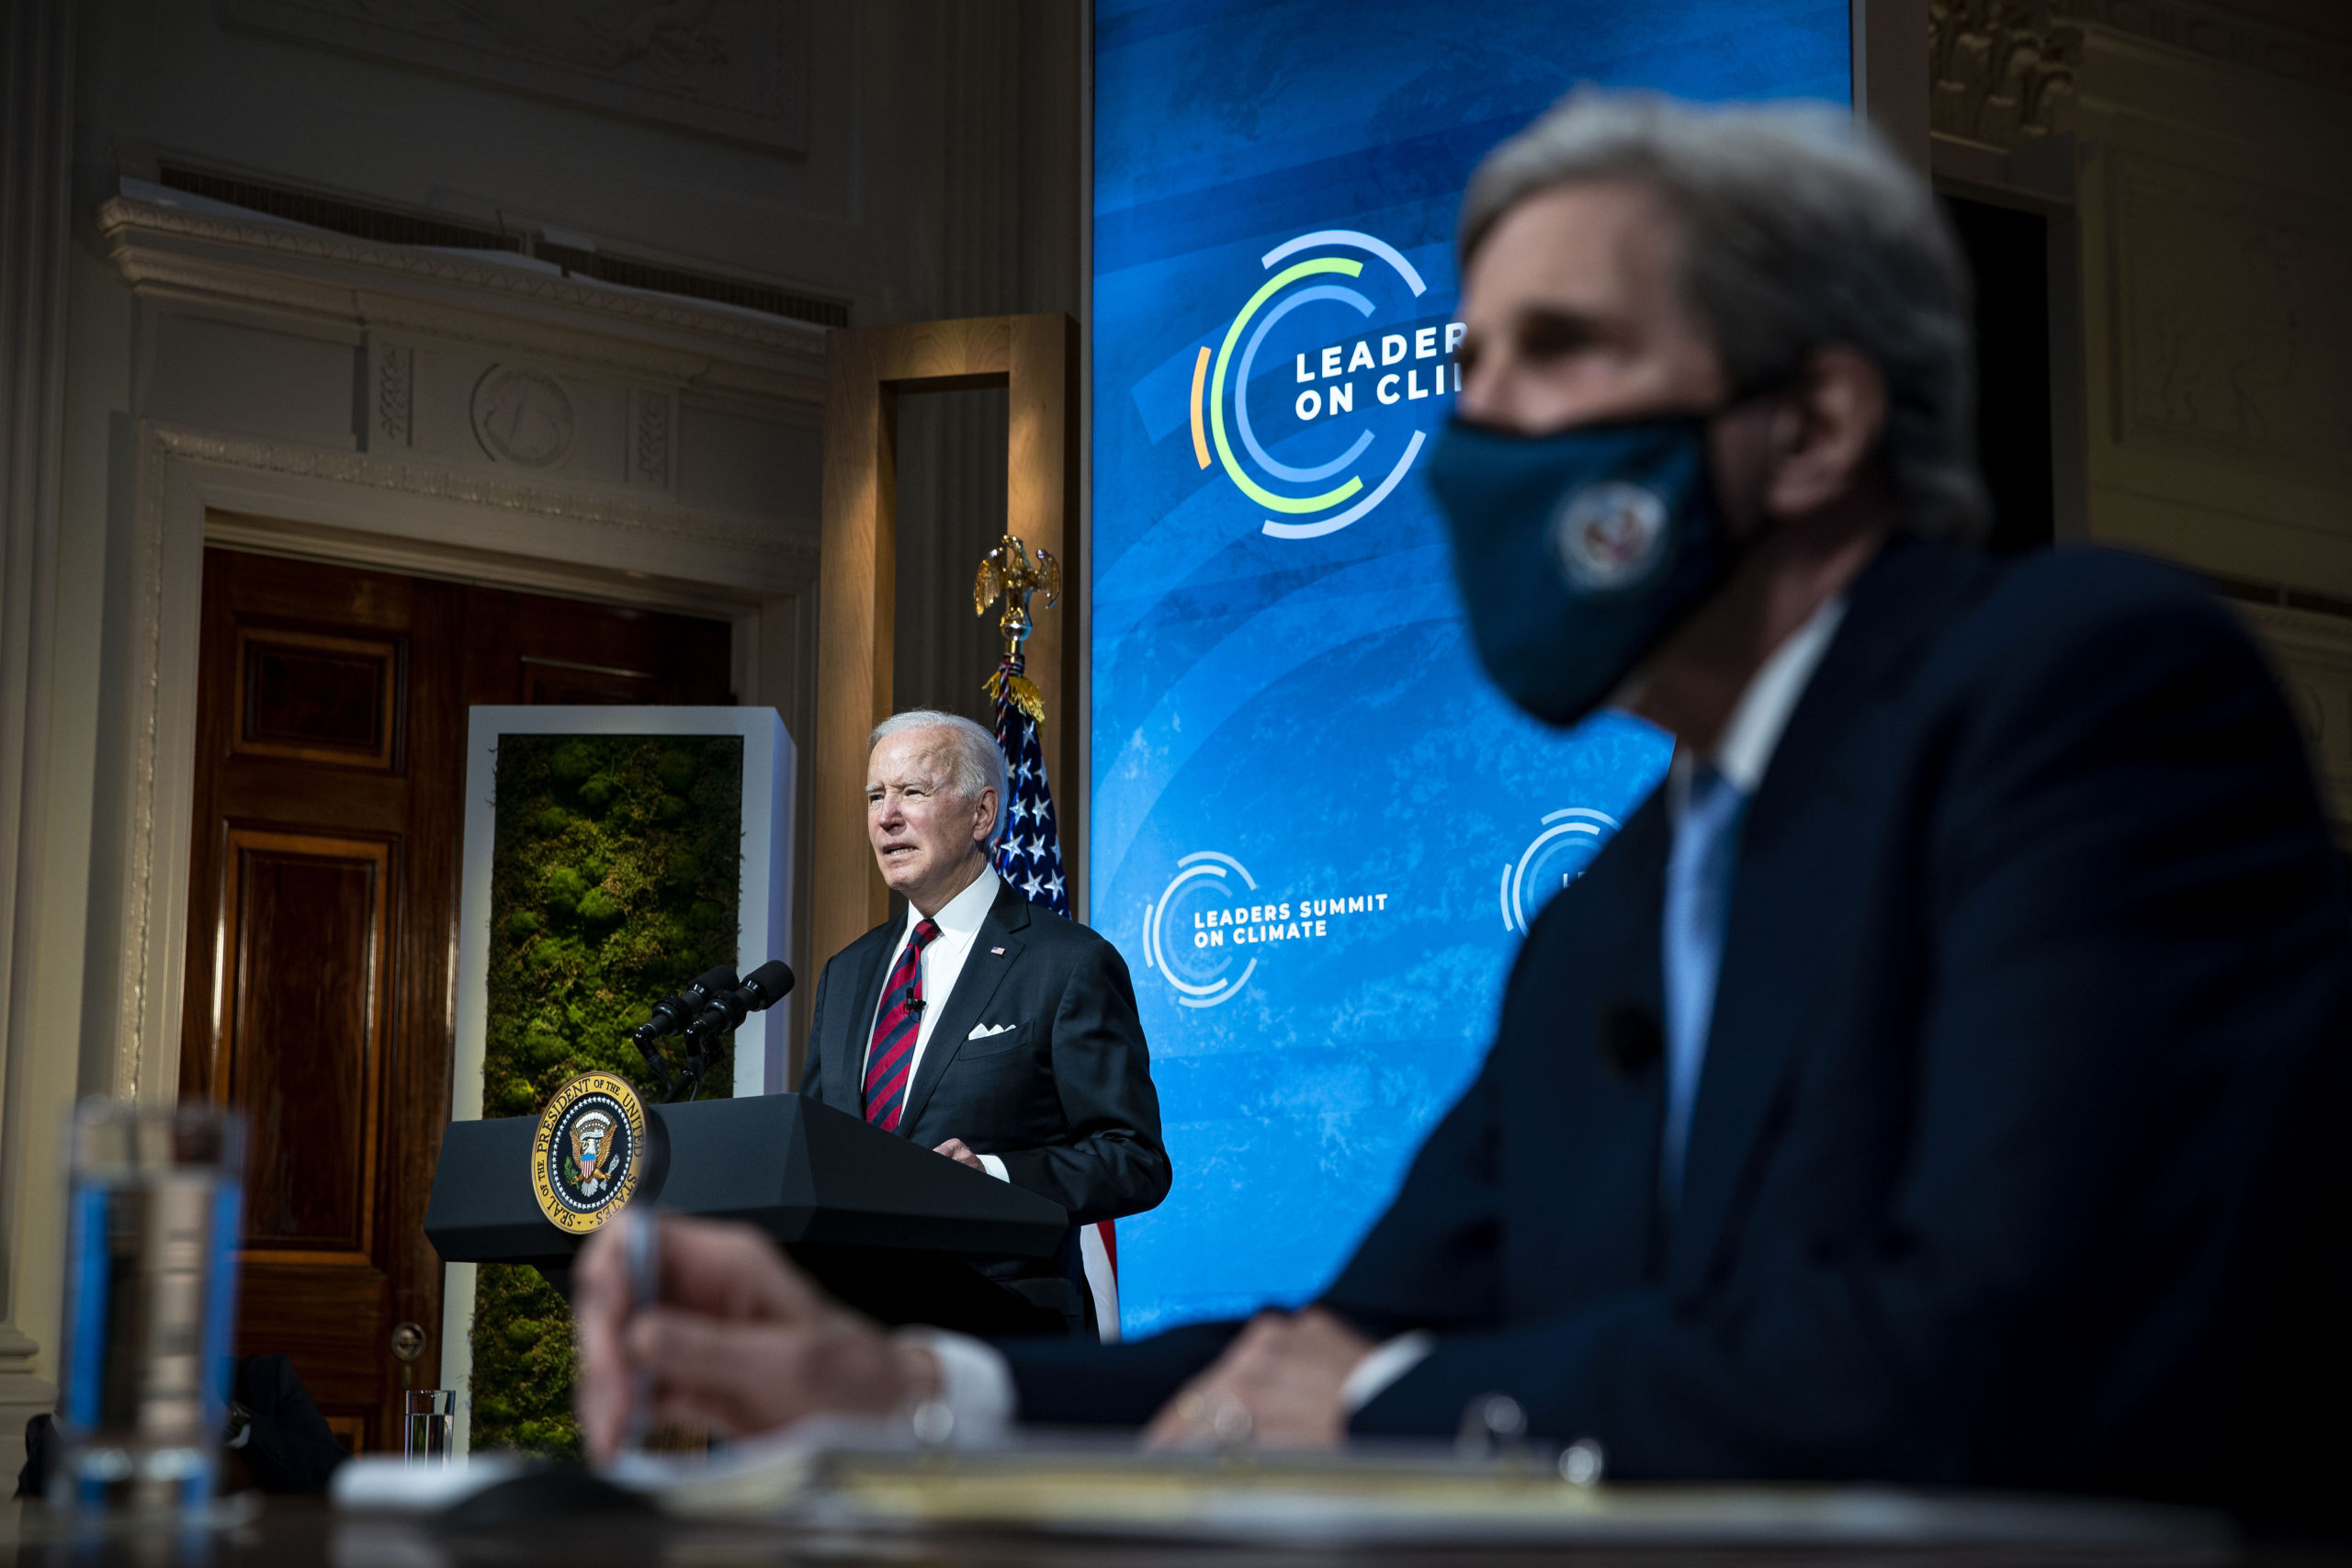 President Joe Biden delivers remarks as Special Presidential Envoy for Climate and former Secretary of State John Kerry listens during a virtual Leaders Summit on Climate on April 22. (Al Drago/Pool/Getty Images)